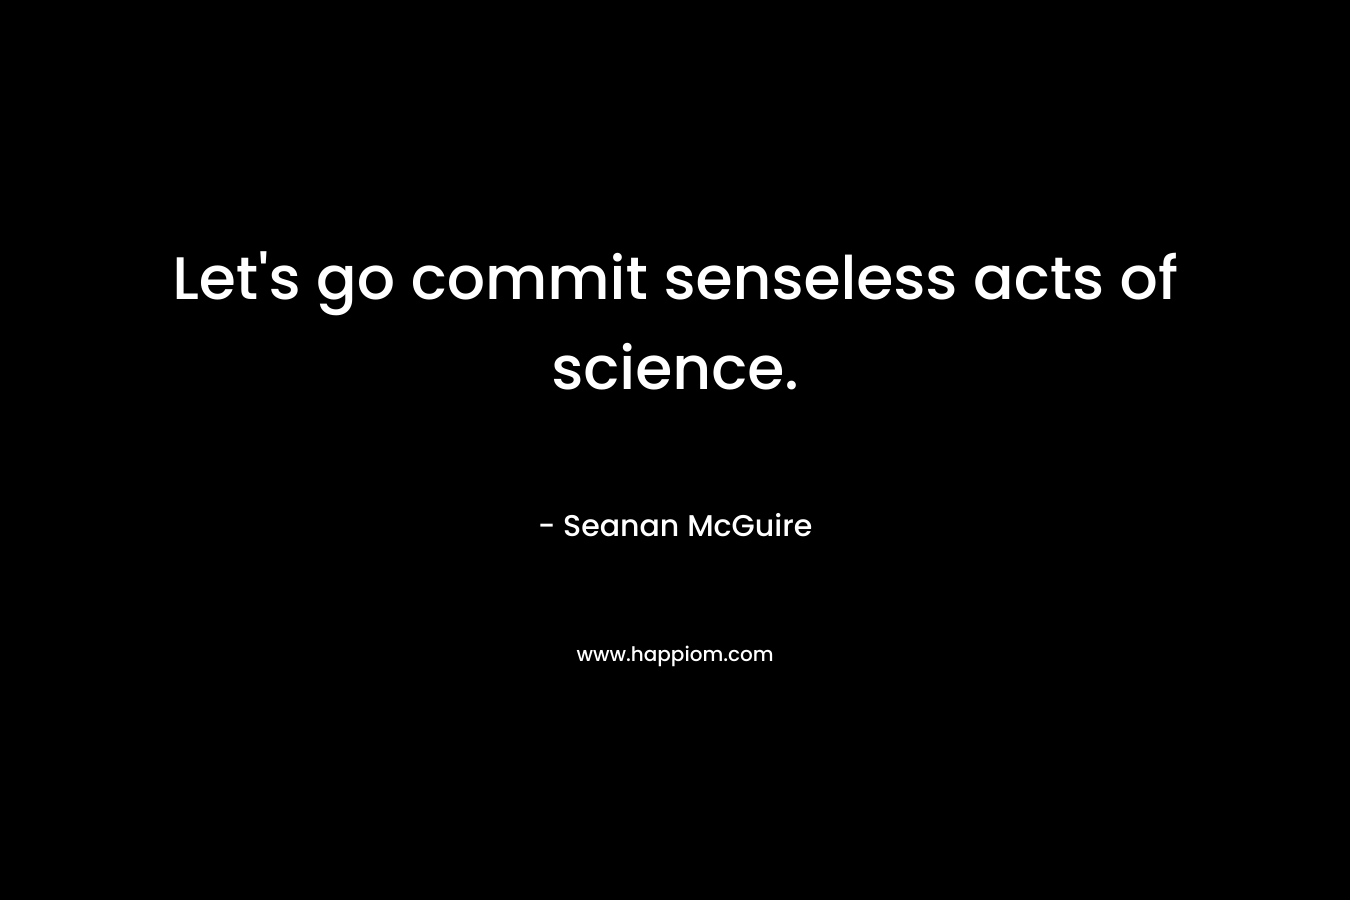 Let's go commit senseless acts of science.